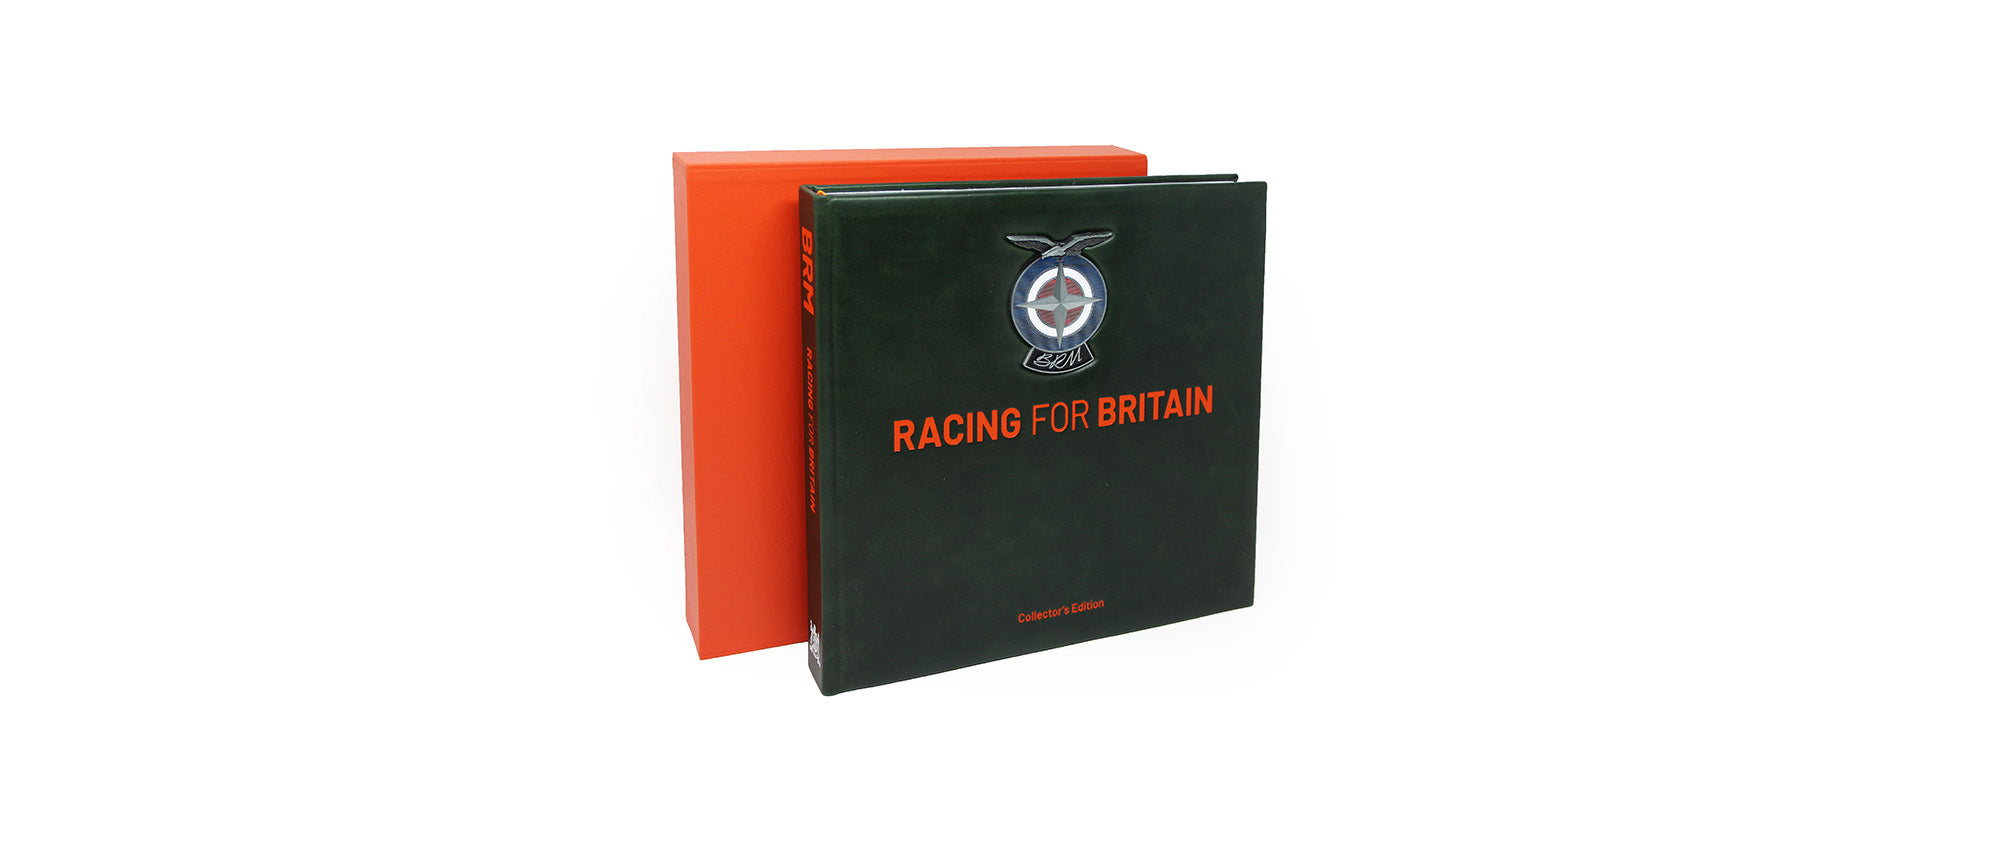 BRM - Racing for Britain (Collector's Edition)